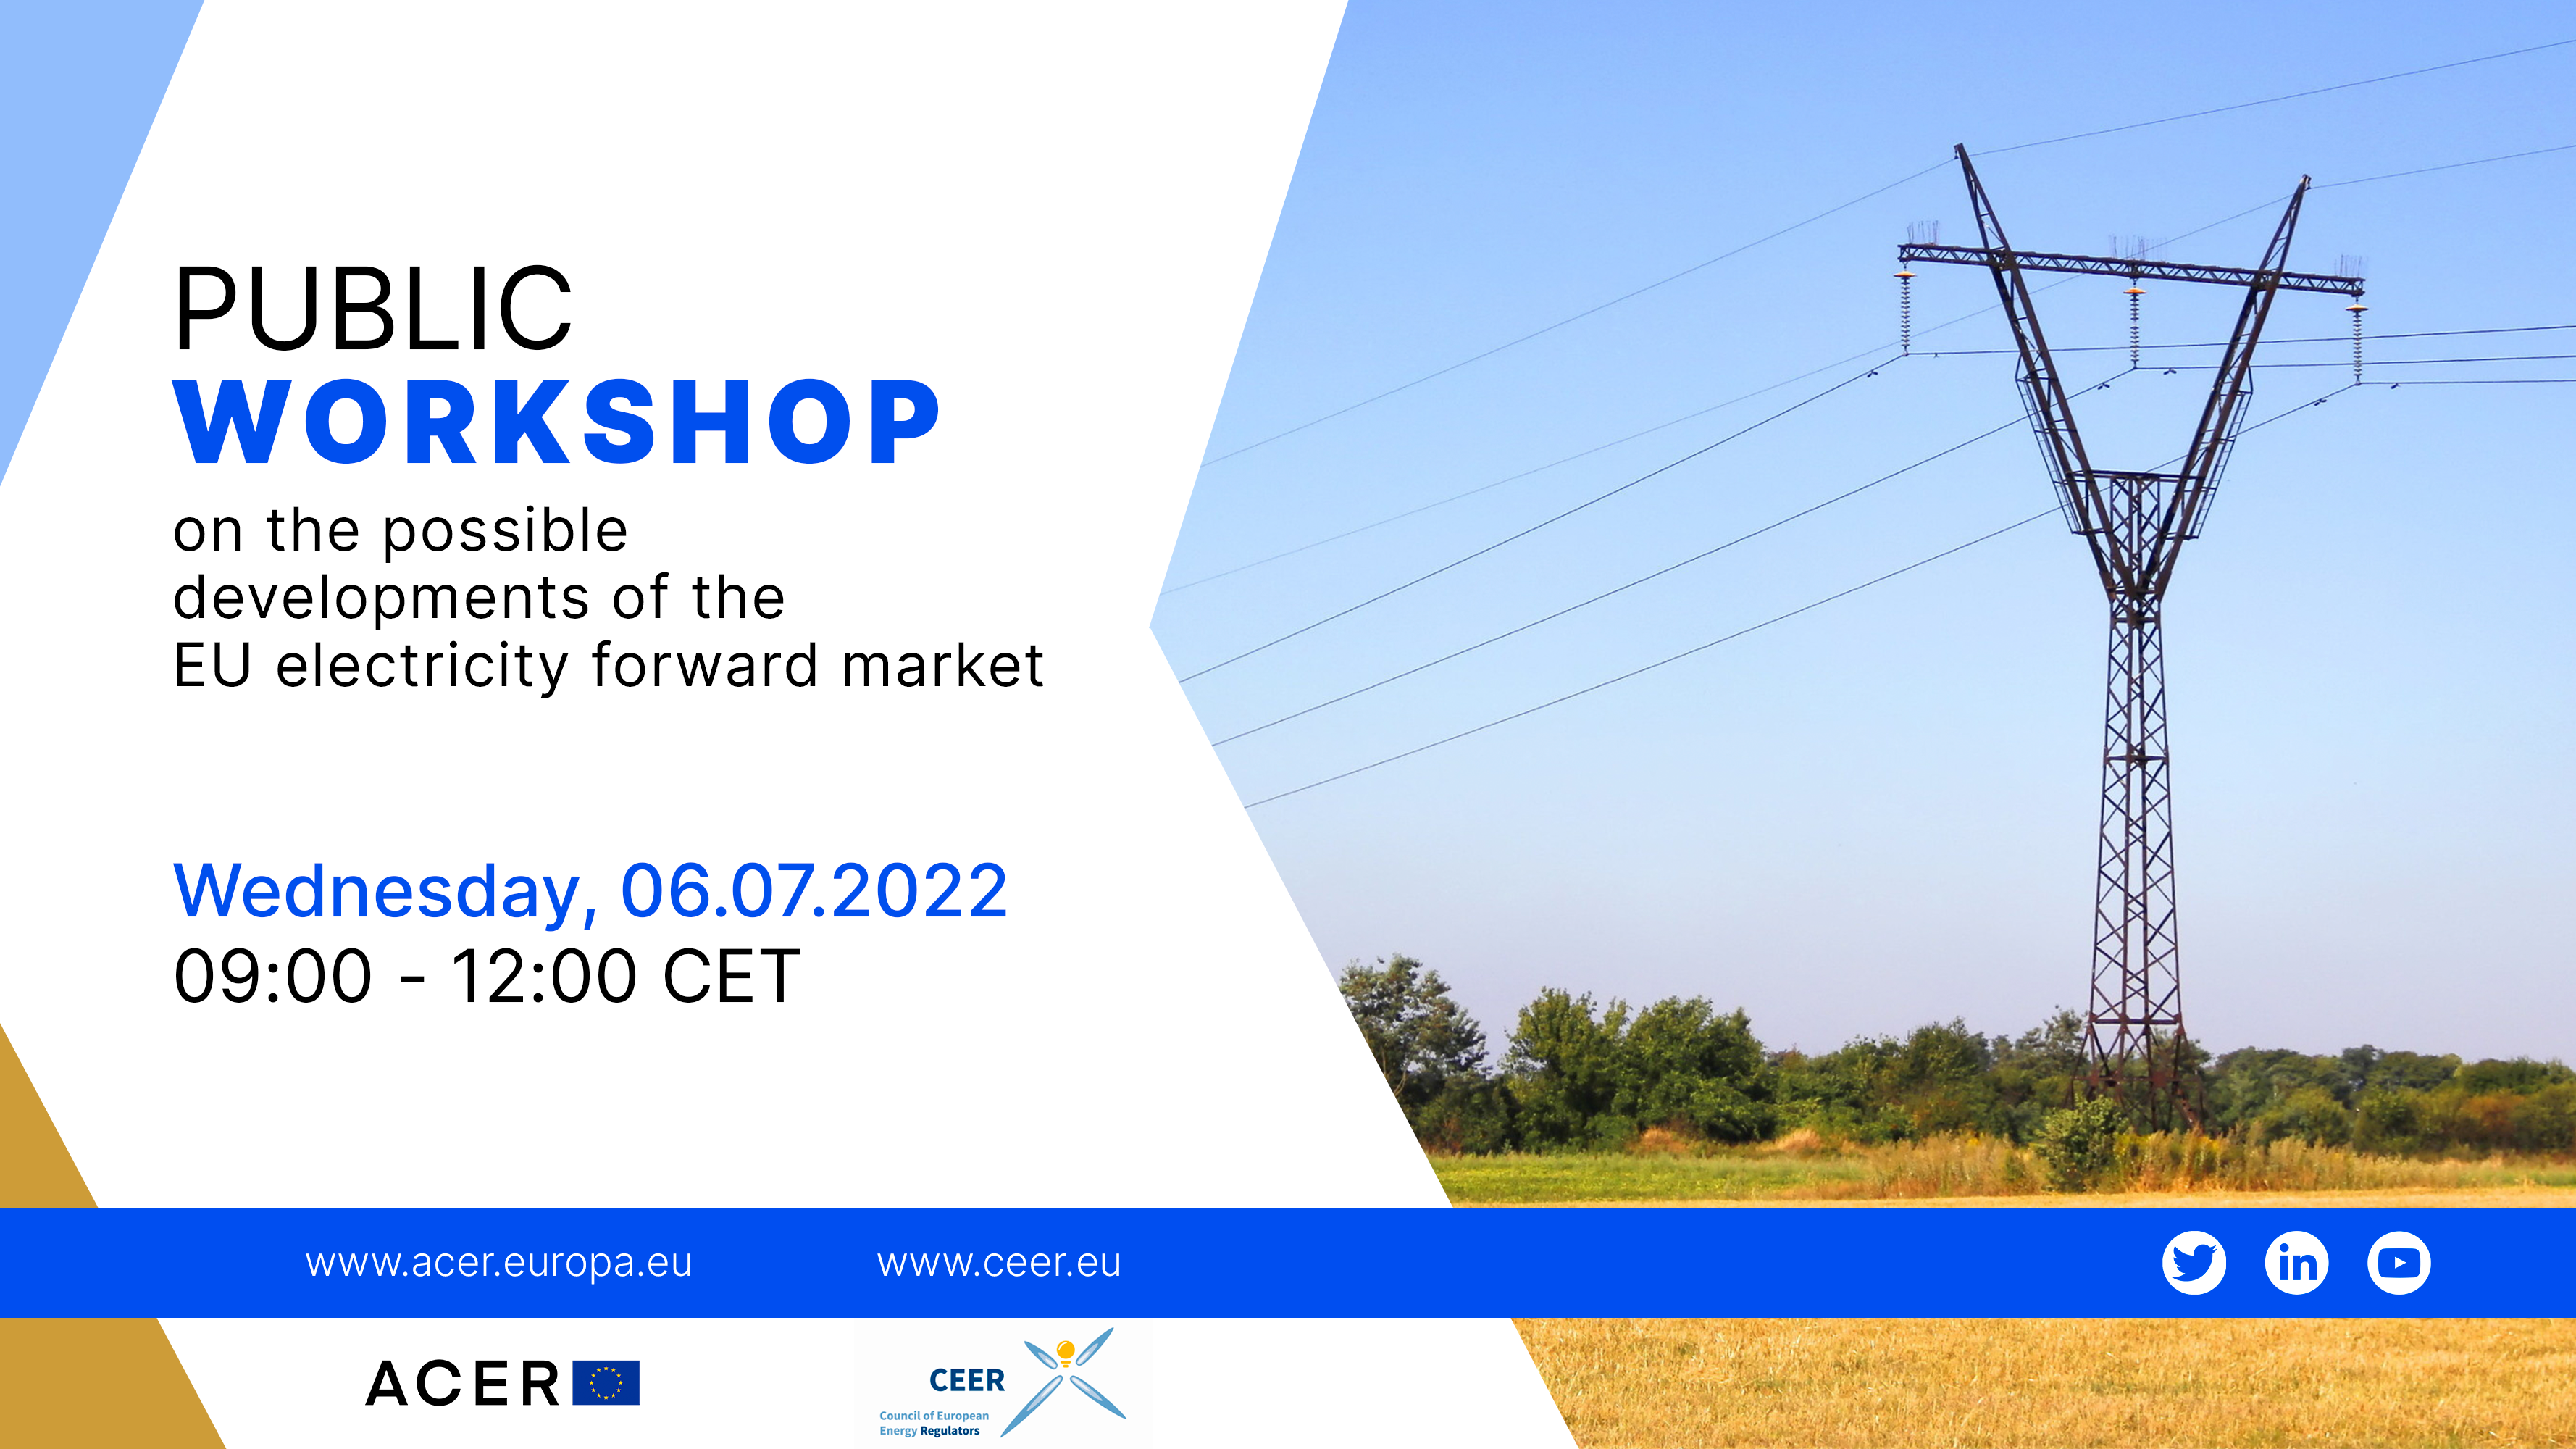 ACER-CEER Public Workshop on the possible developments of the EU electricity forward market 